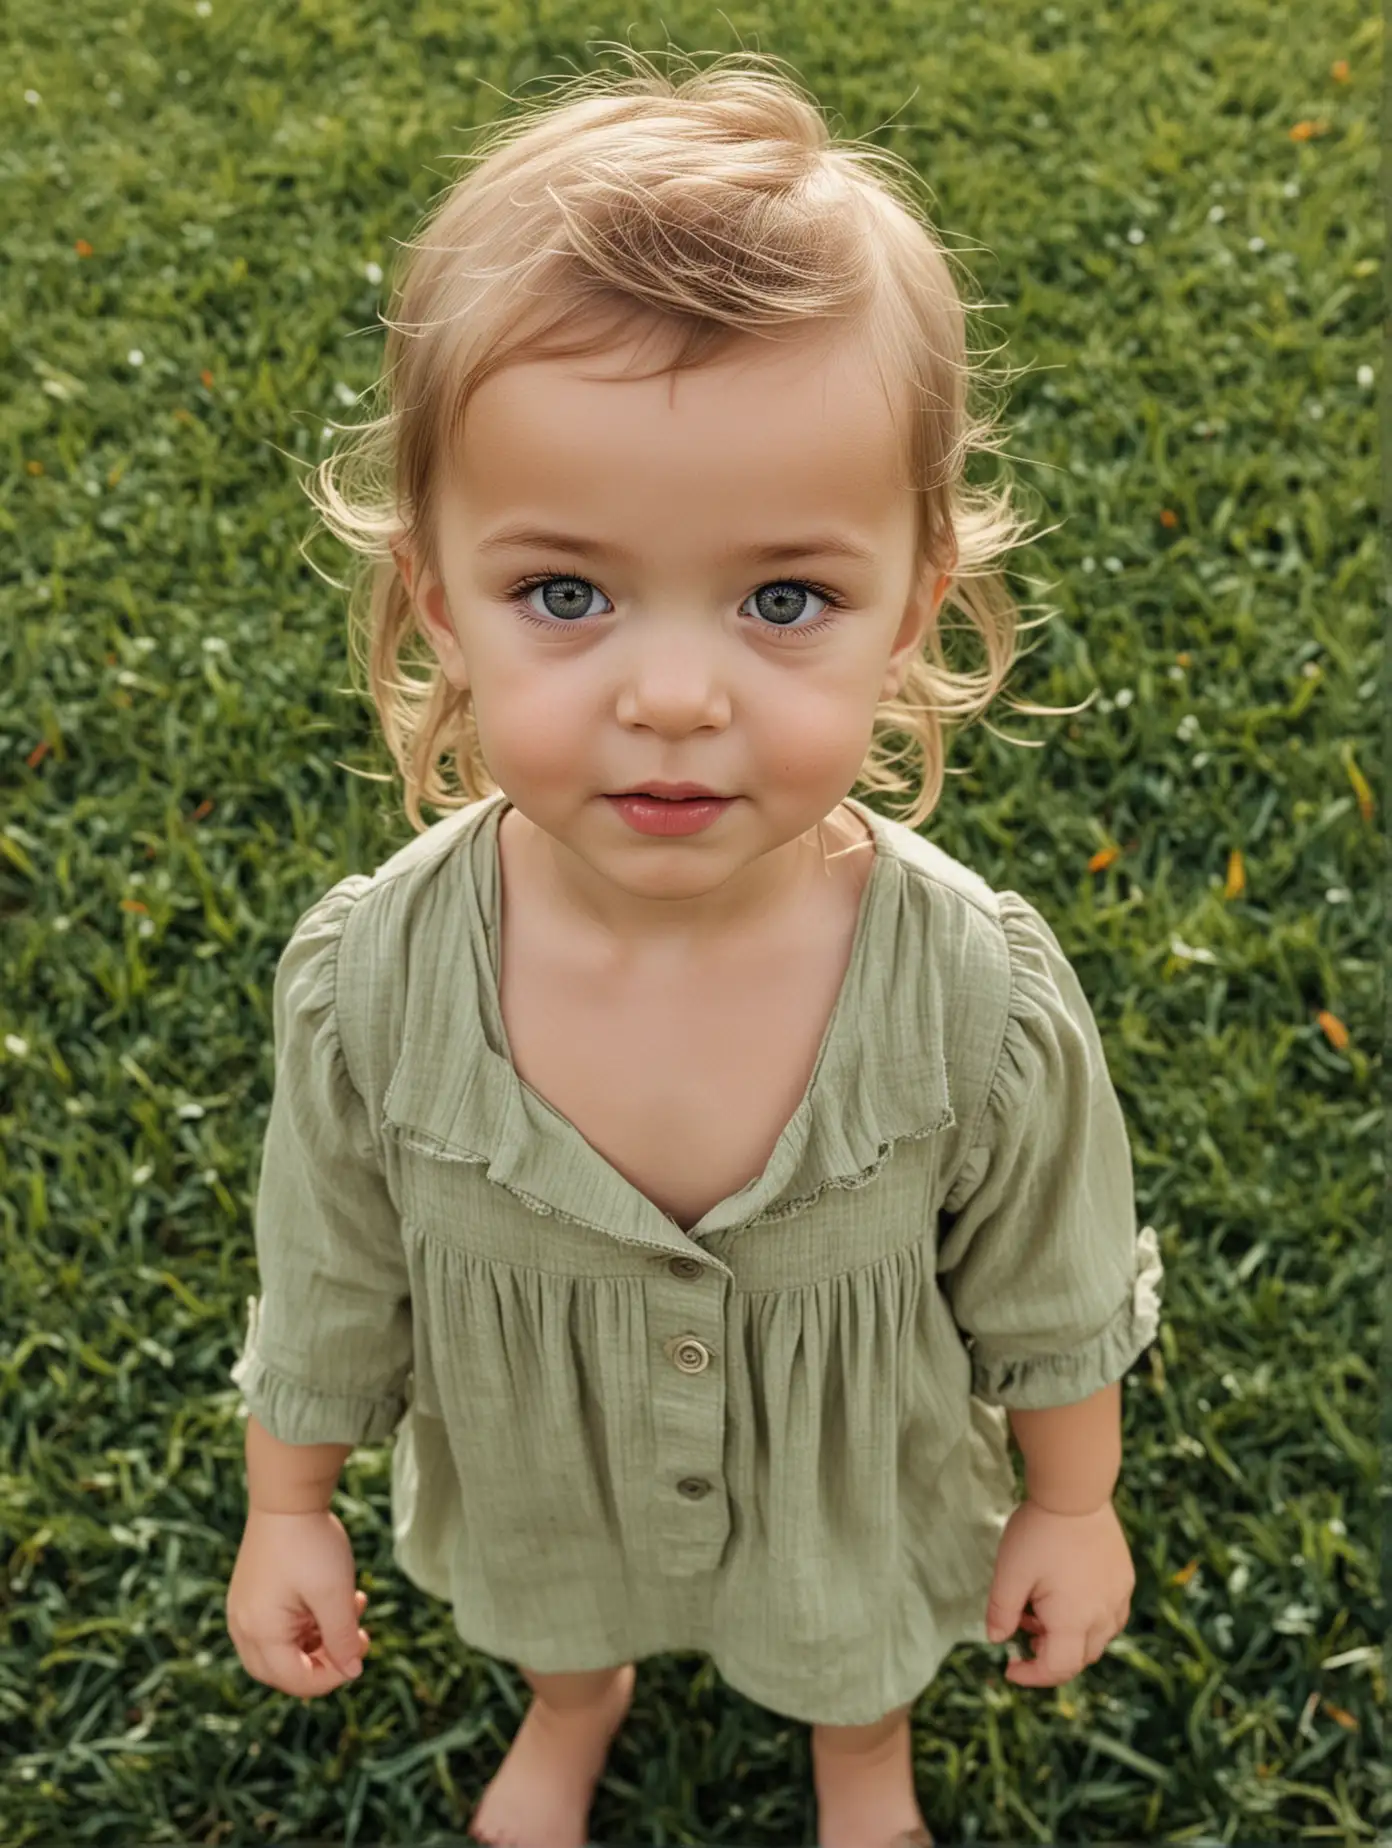 A walking baby, 4-6 years old, on the grass, facing the camera, with exquisite facial features and professional photography technology